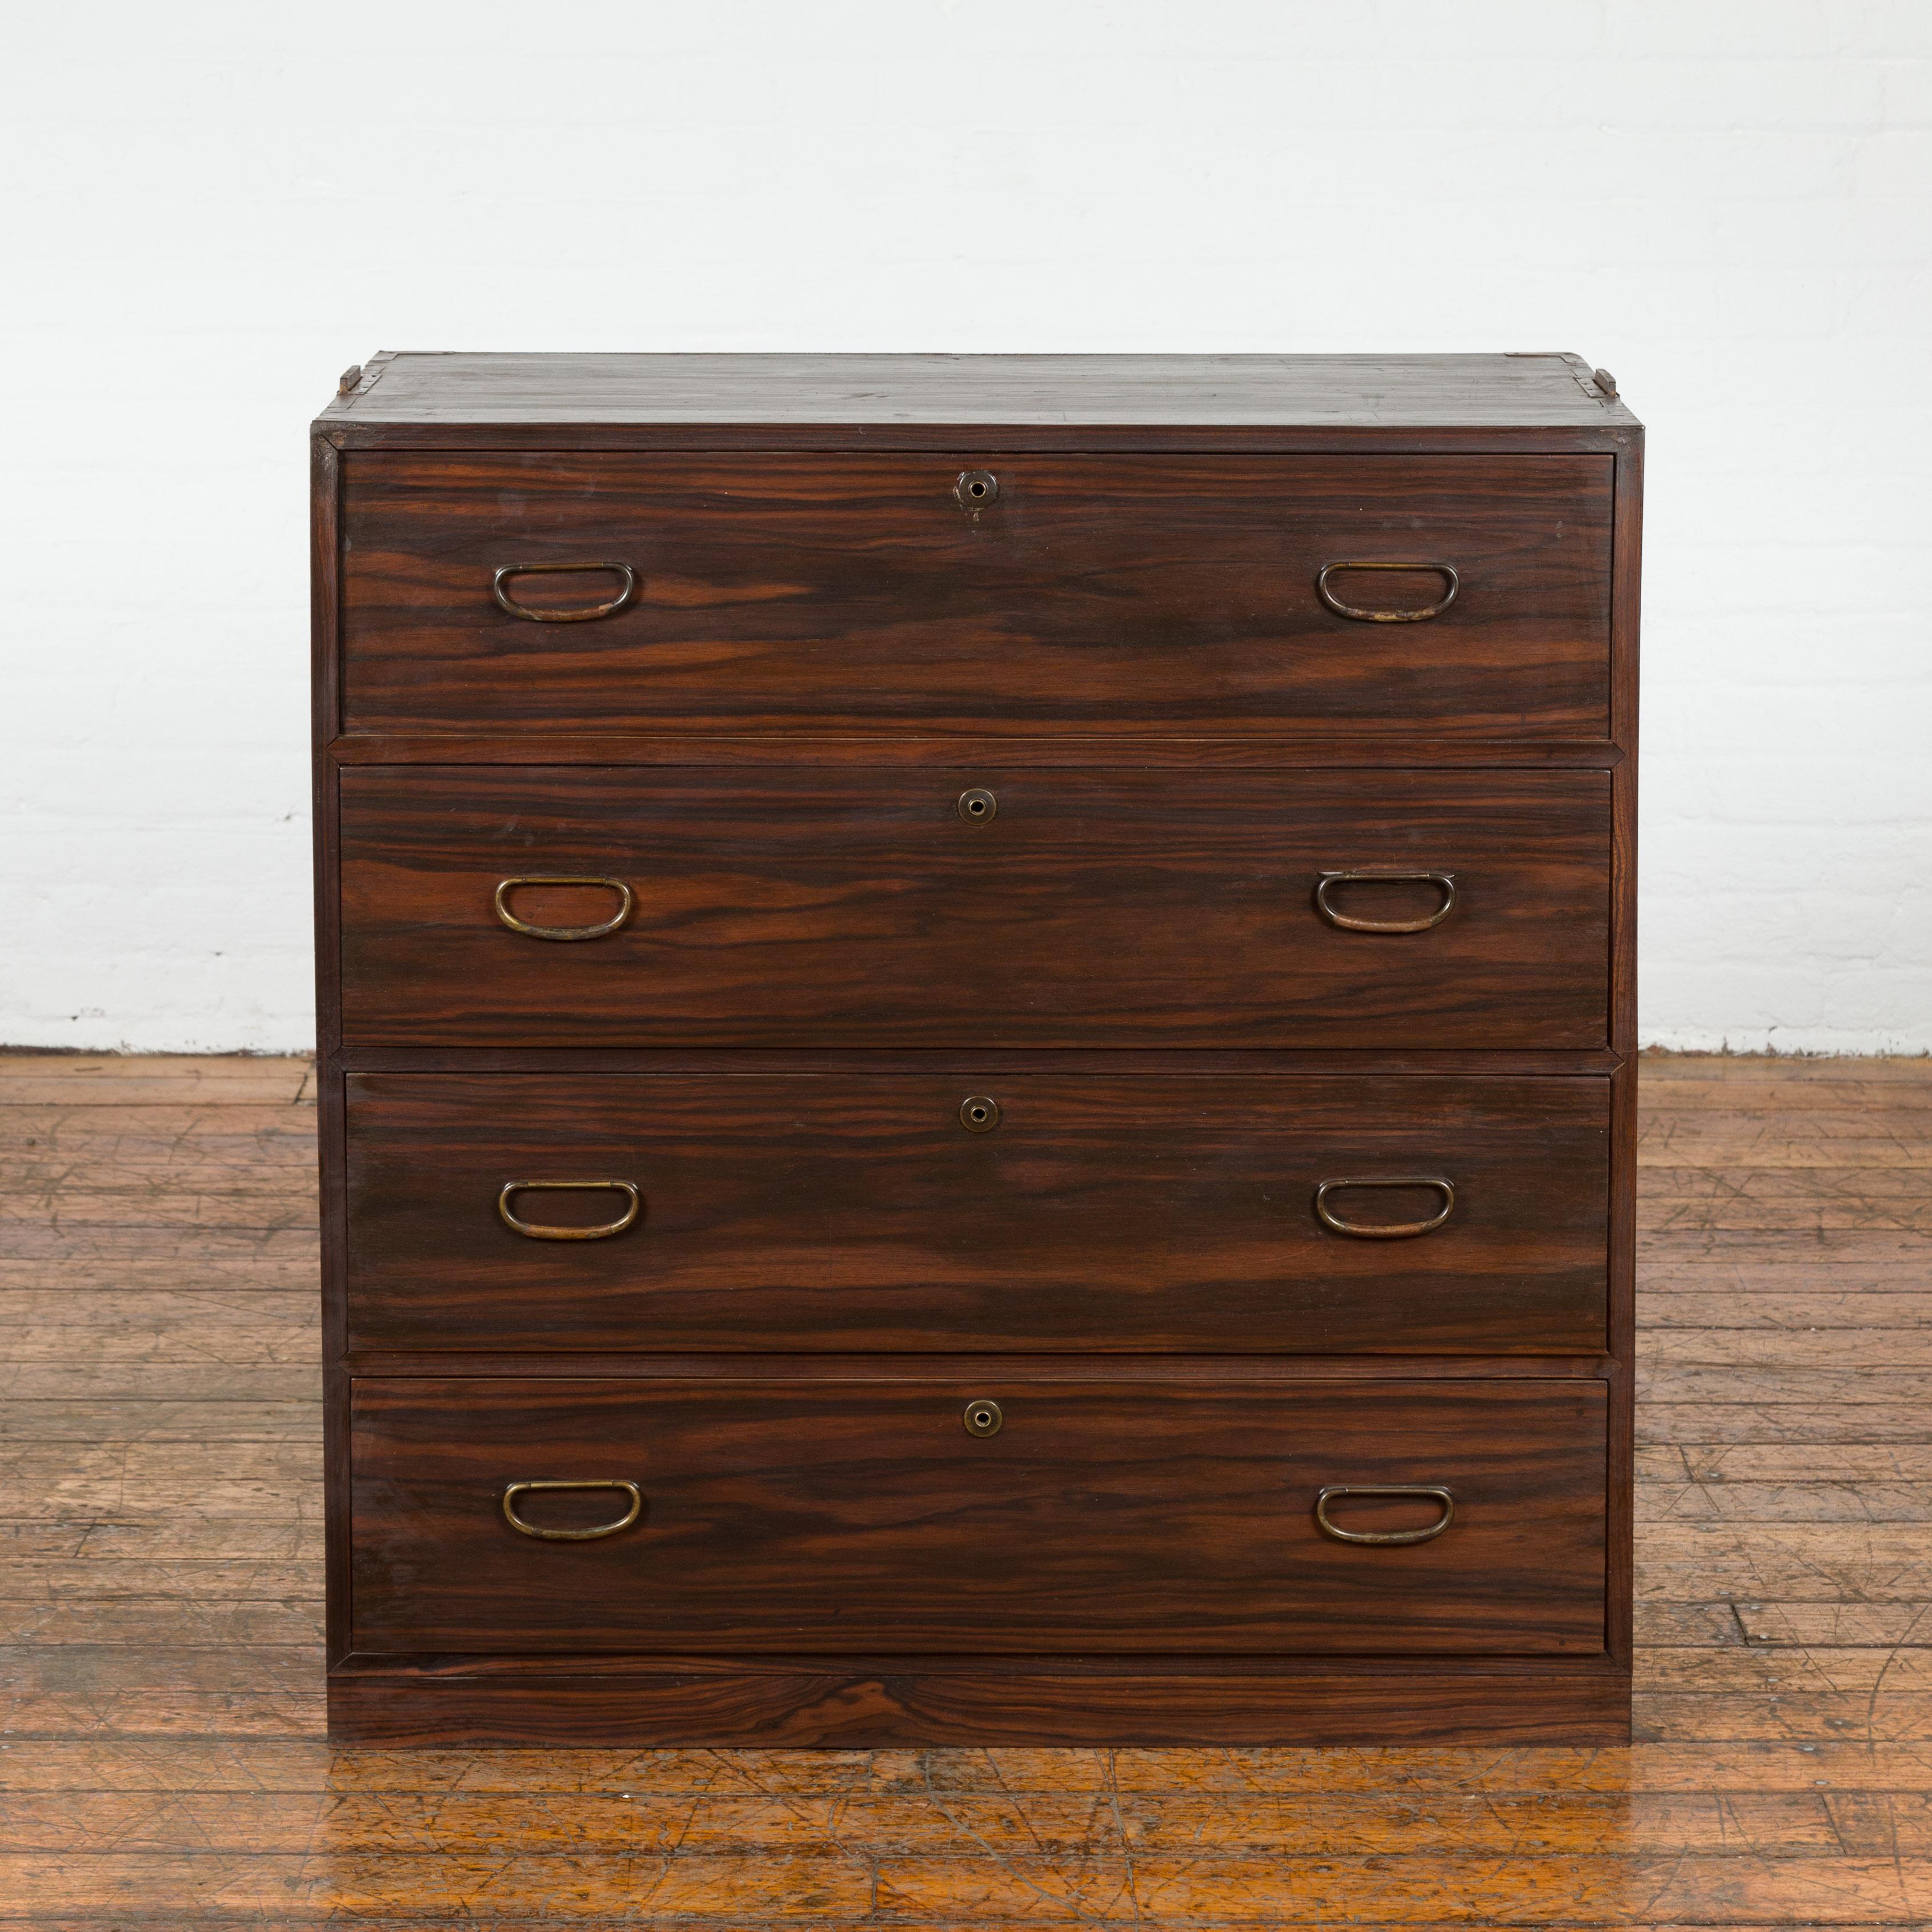 A Japanese Taisho period zebra wood tansu chest from the early 20th century with four drawers, brass hardware and pierced side handles. Elevate your home with the raw beauty of zebra wood, presented in this captivating Japanese Taisho period tansu